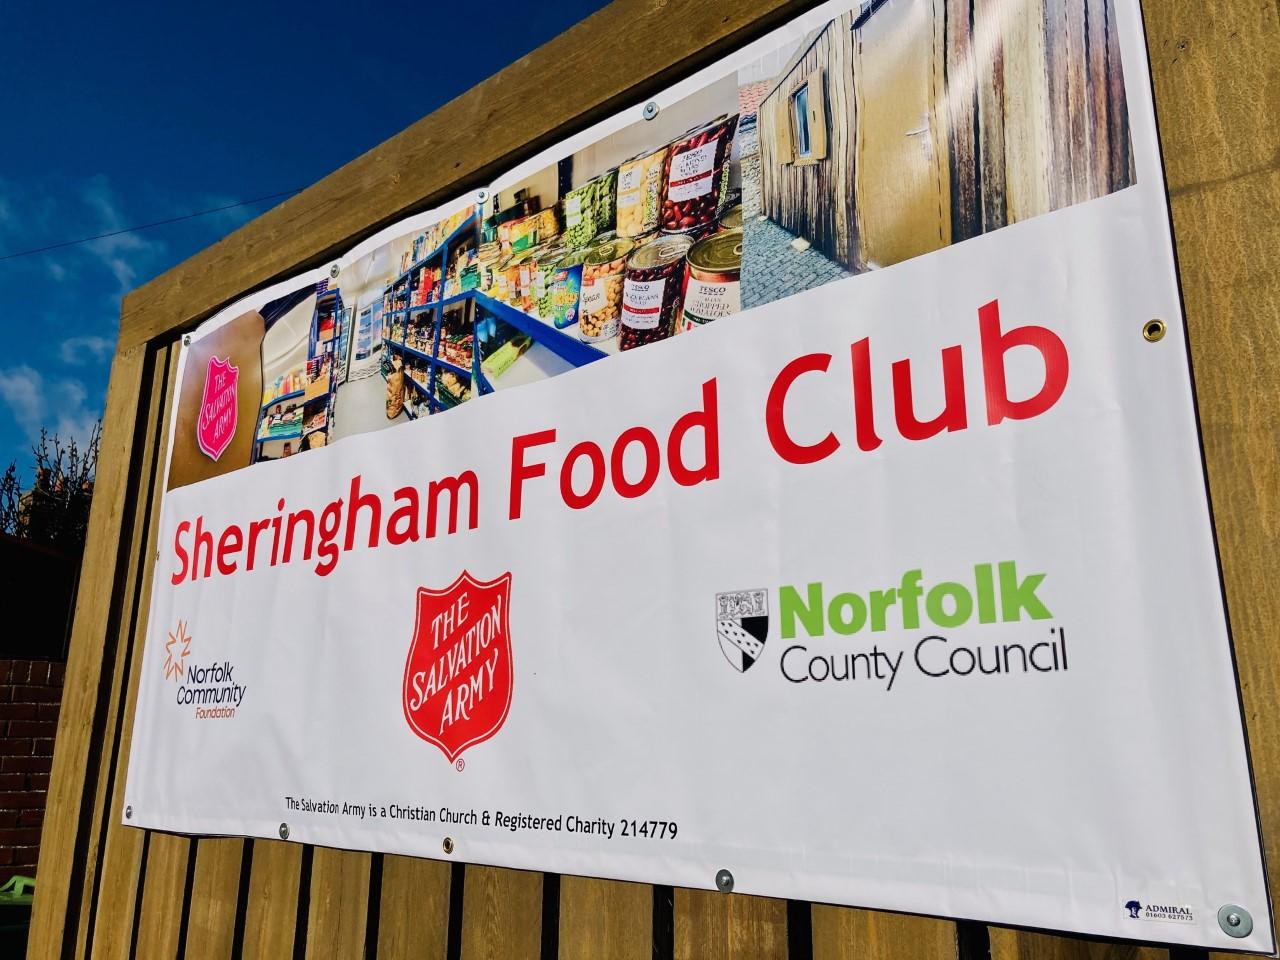 A banner promoting Sheringham Food Club on top of a wood panelled fence.